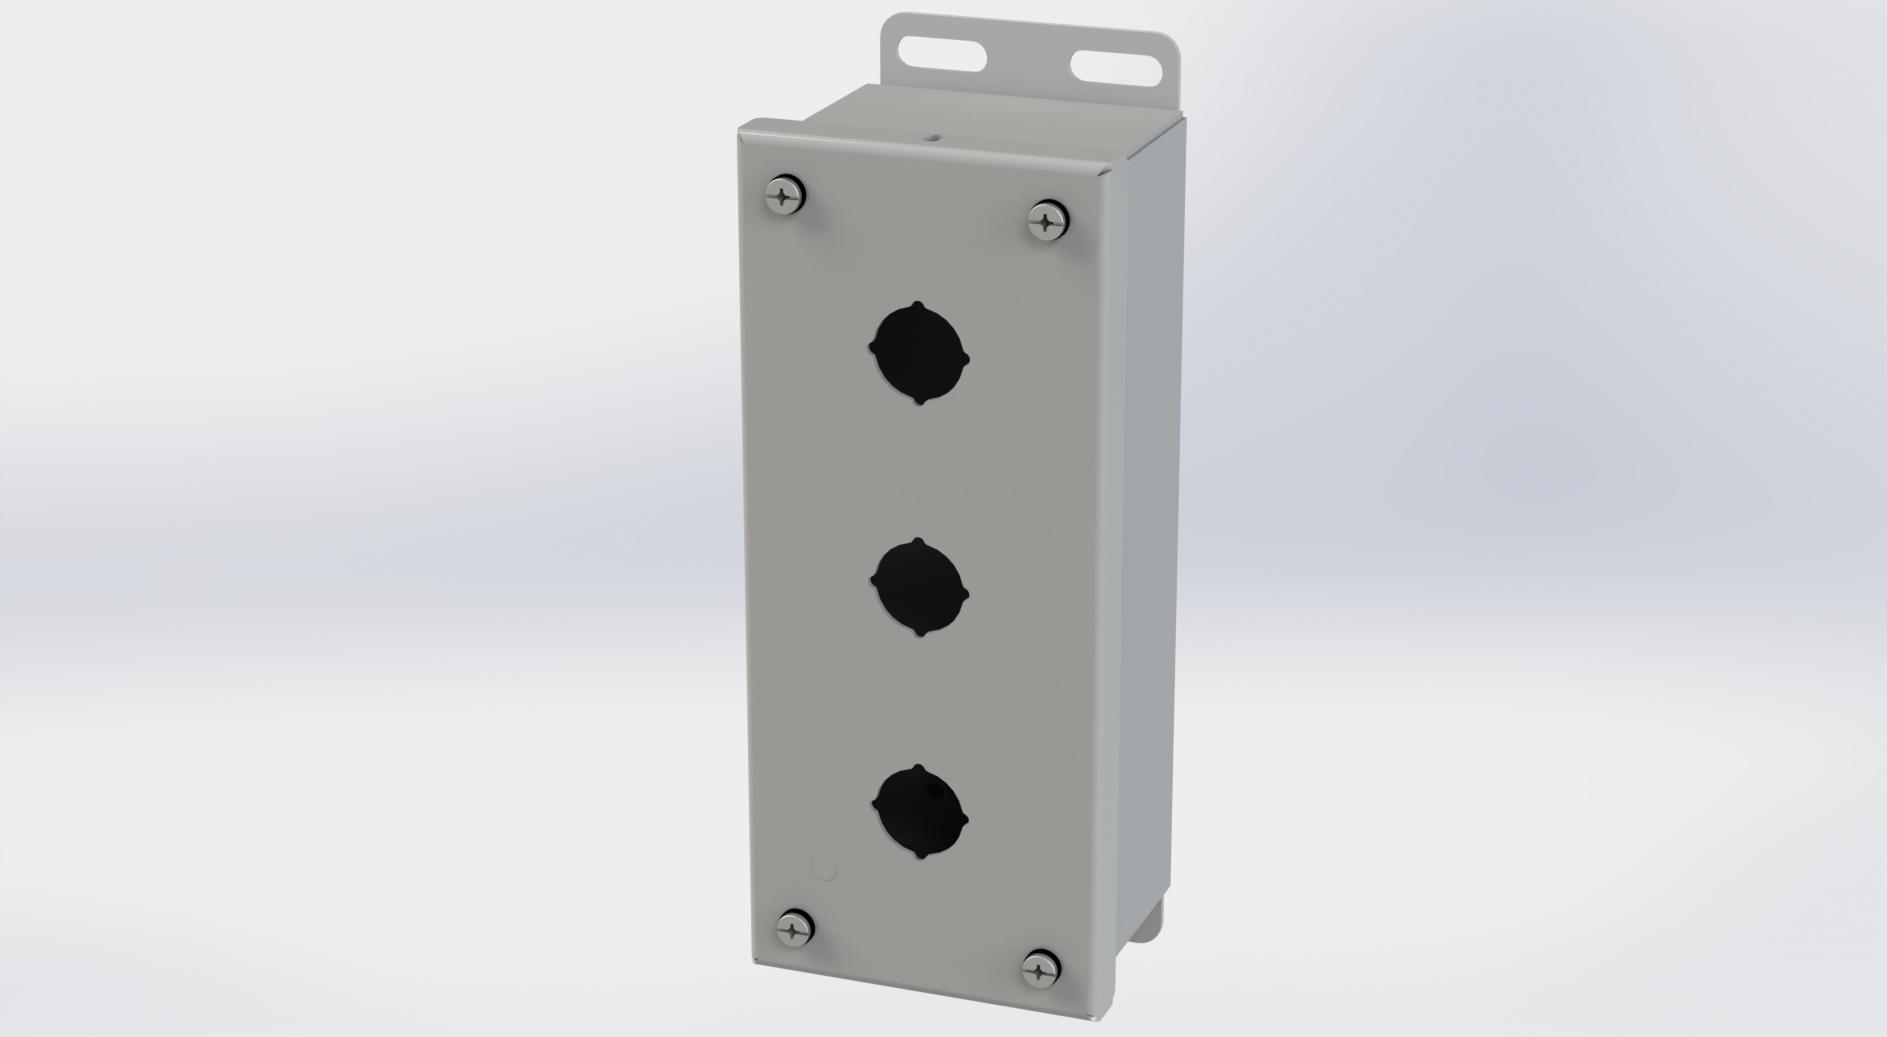 Saginaw Control SCE-3PBI PB Enclosure, Height:8.00", Width:3.25", Depth:2.75", ANSI-61 gray powder coat inside and out. 